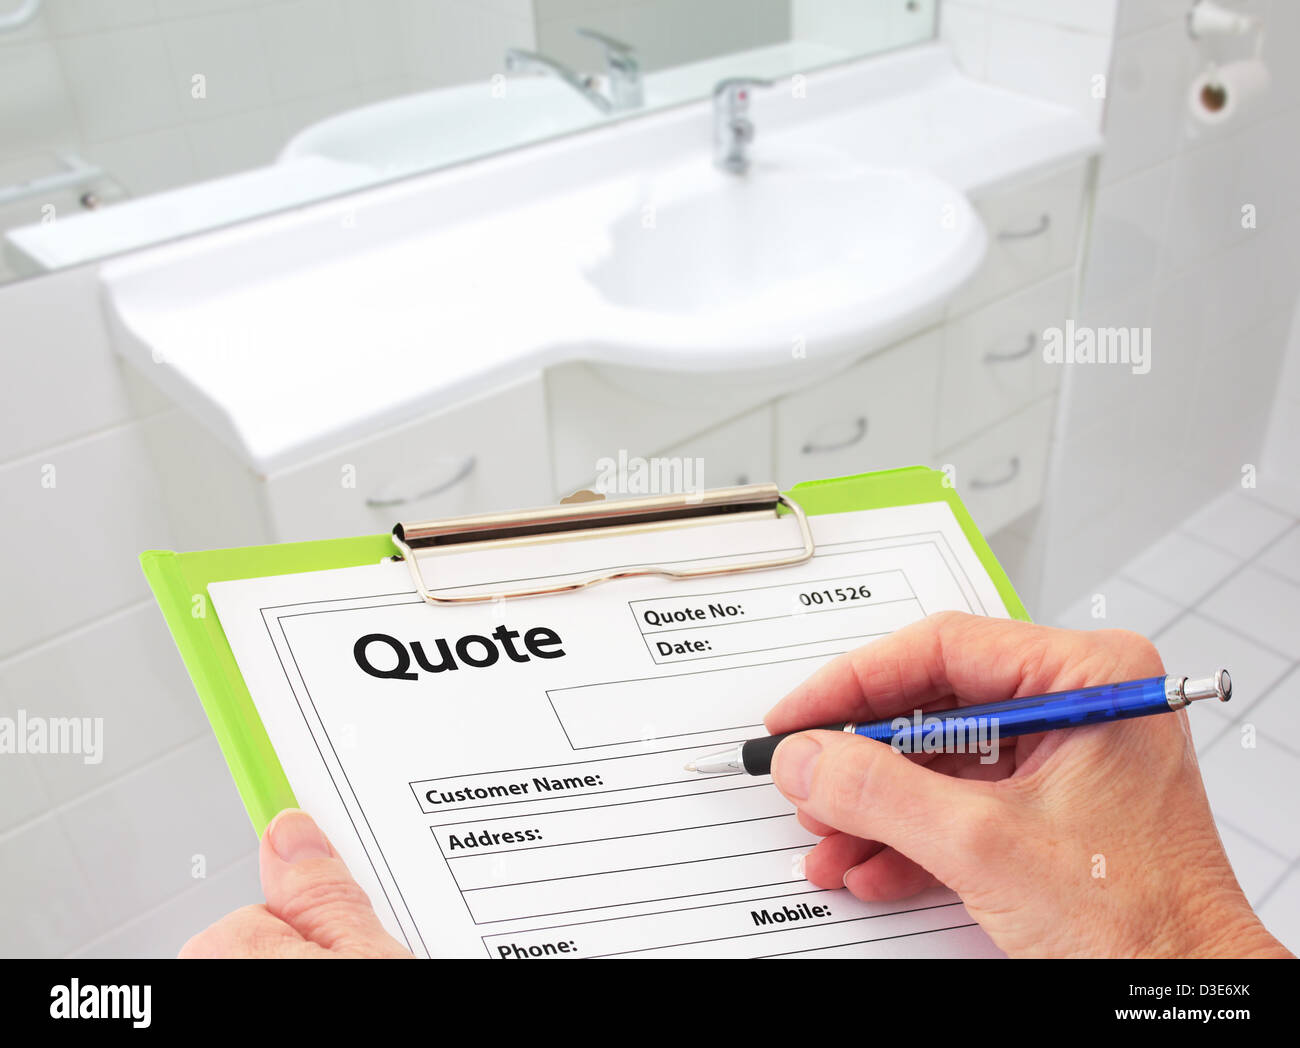 Hand Writing a Quote for Bathroom Renovation Stock Photo